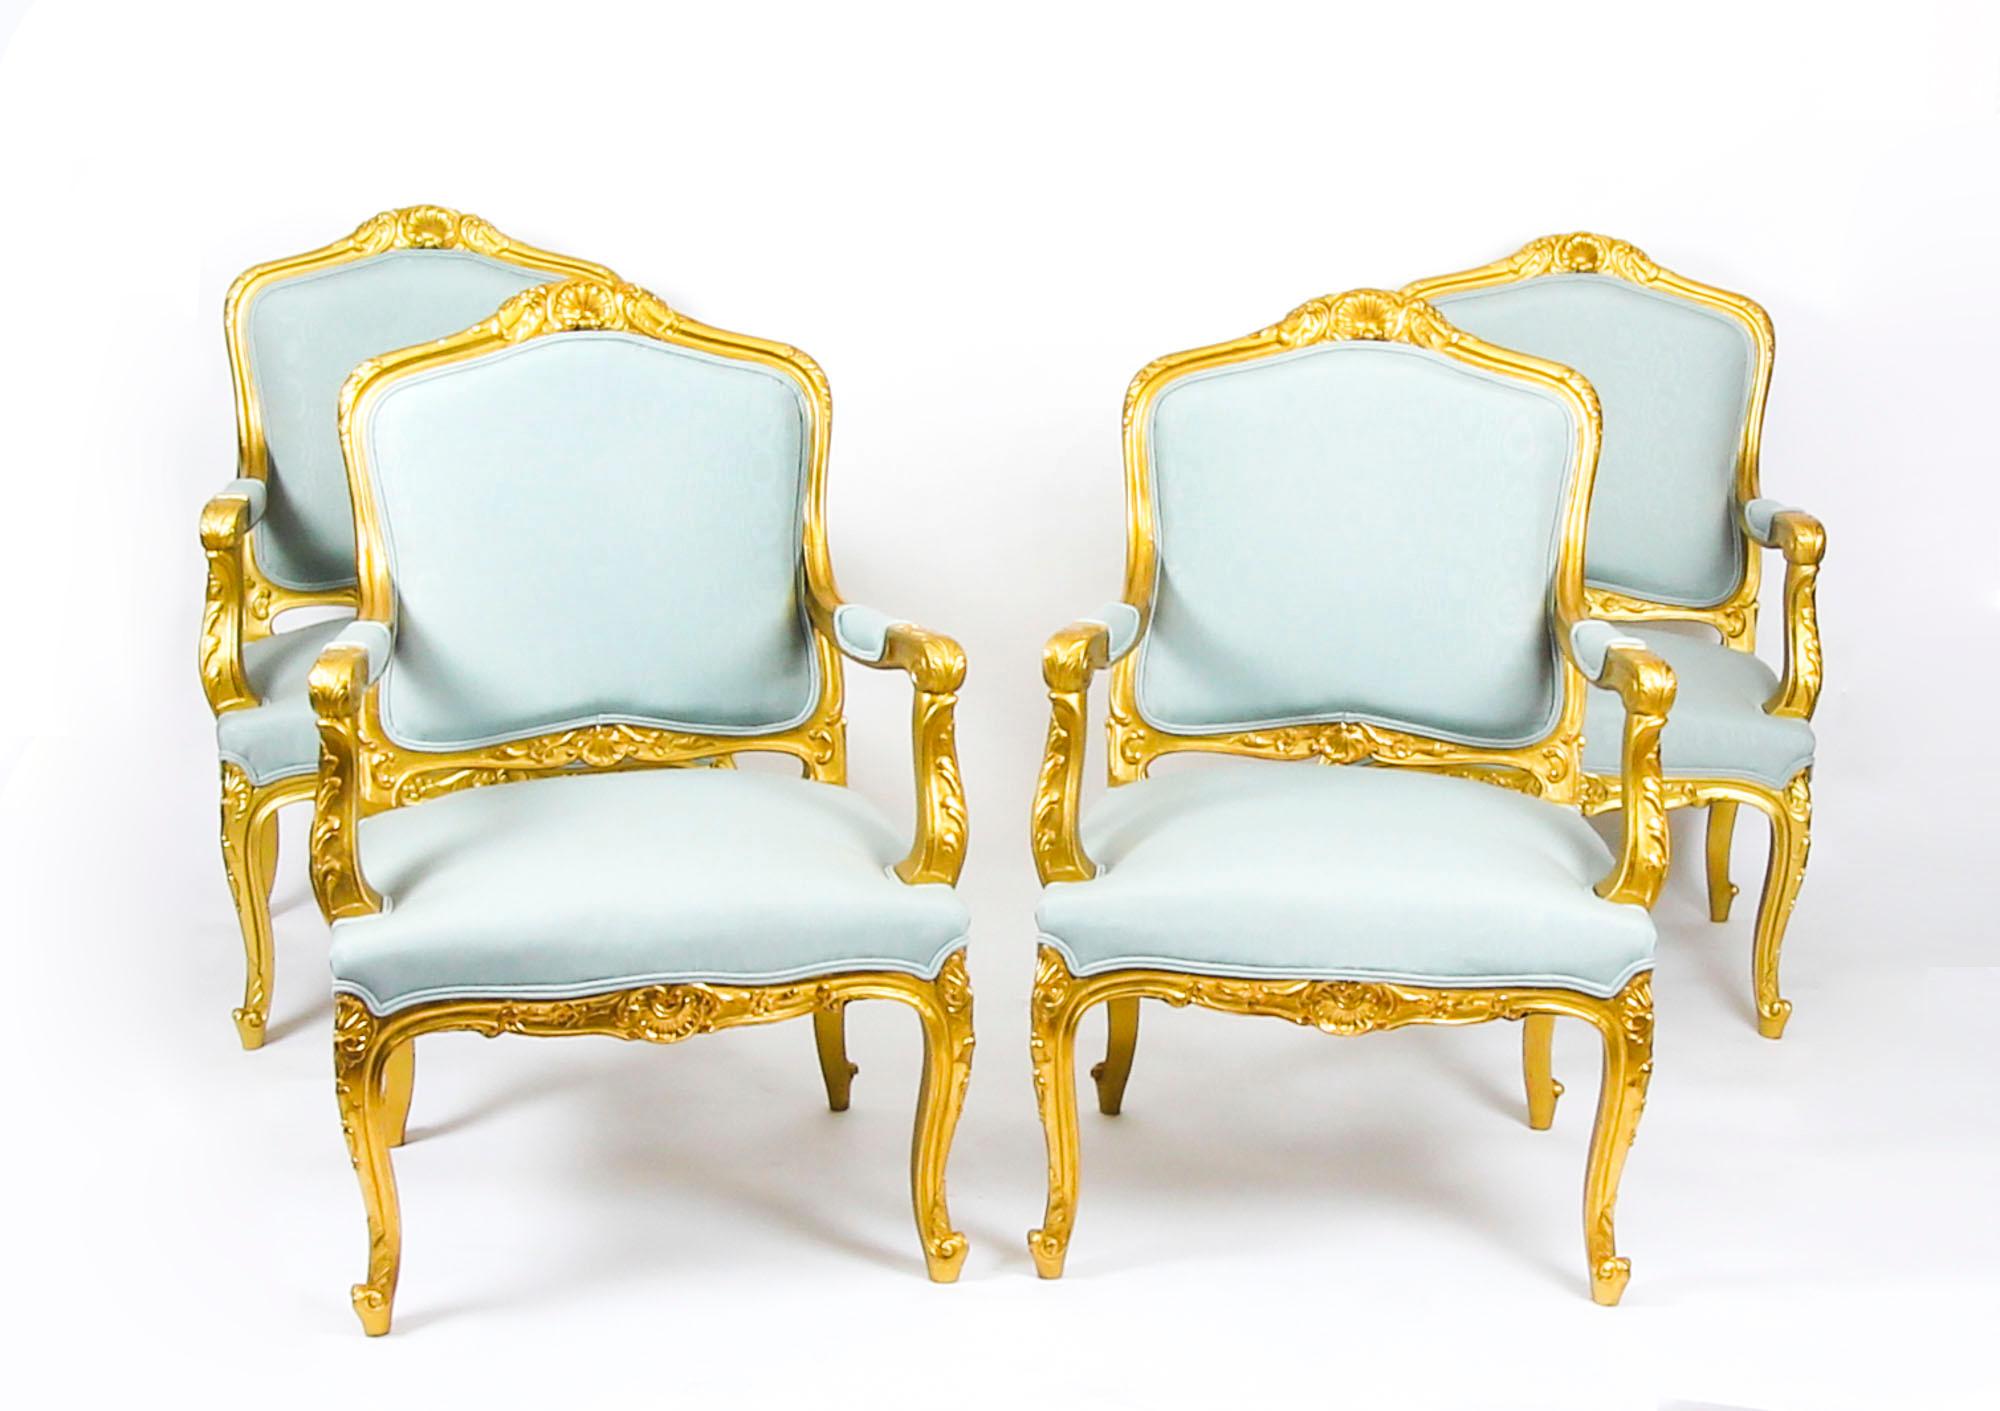 Antique Set of 4 Louis Revival French Giltwood Armchairs, 19th Century 7